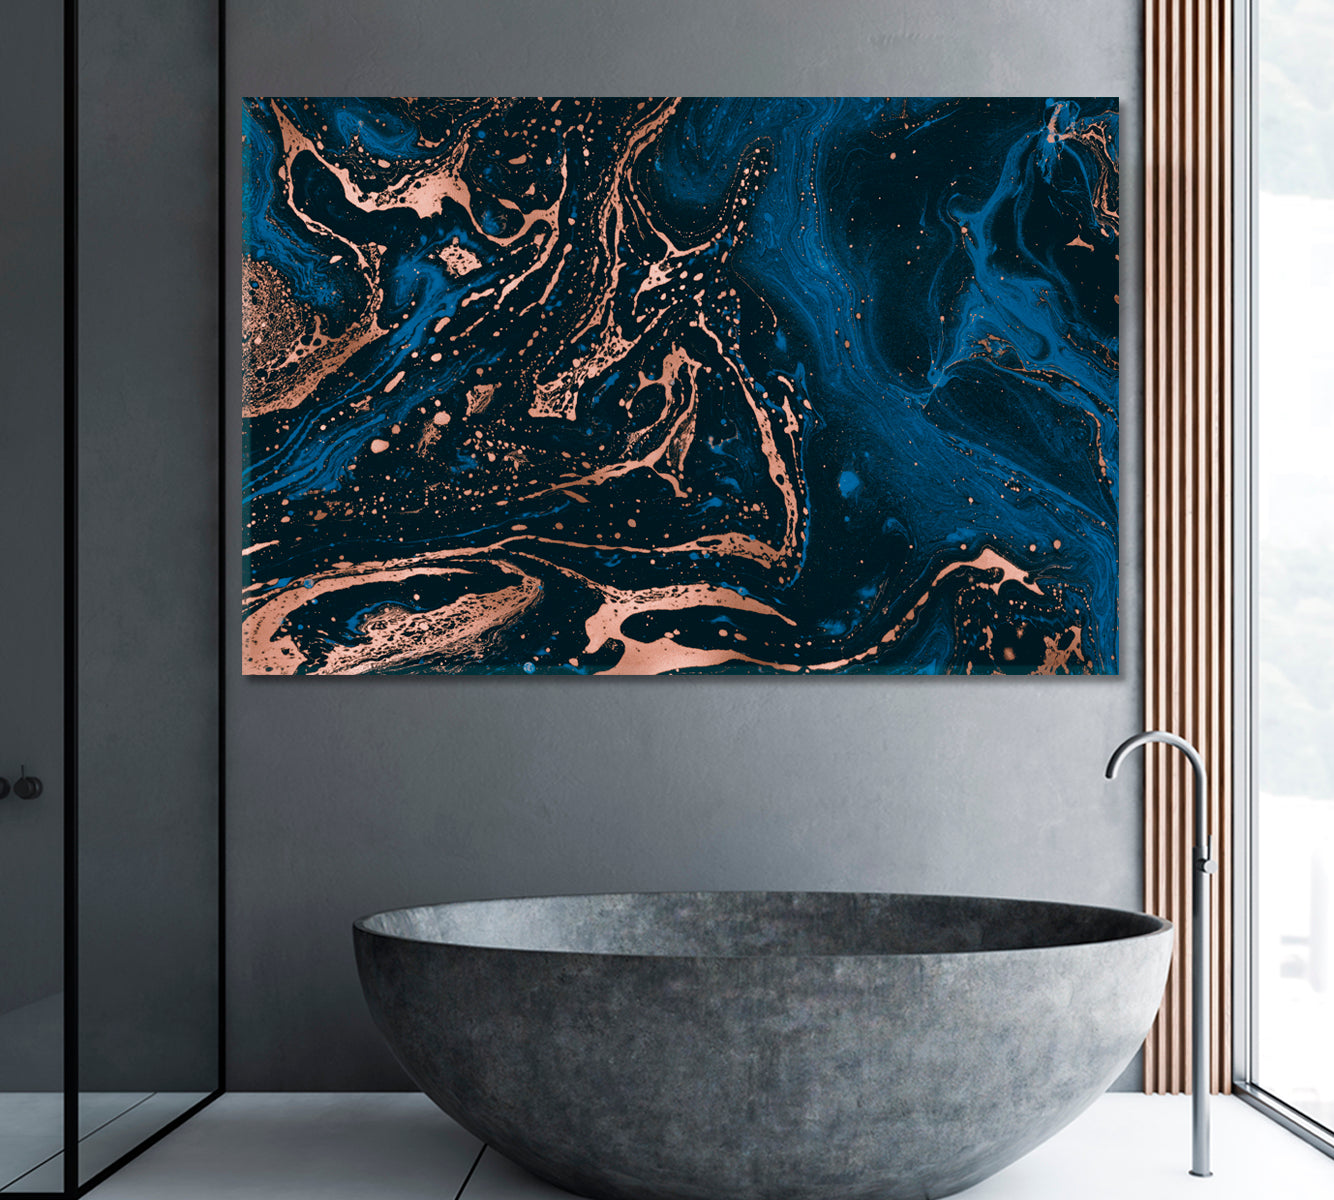 Abstract Blue and Bronze Liquid Marble Canvas Print ArtLexy 1 Panel 24"x16" inches 